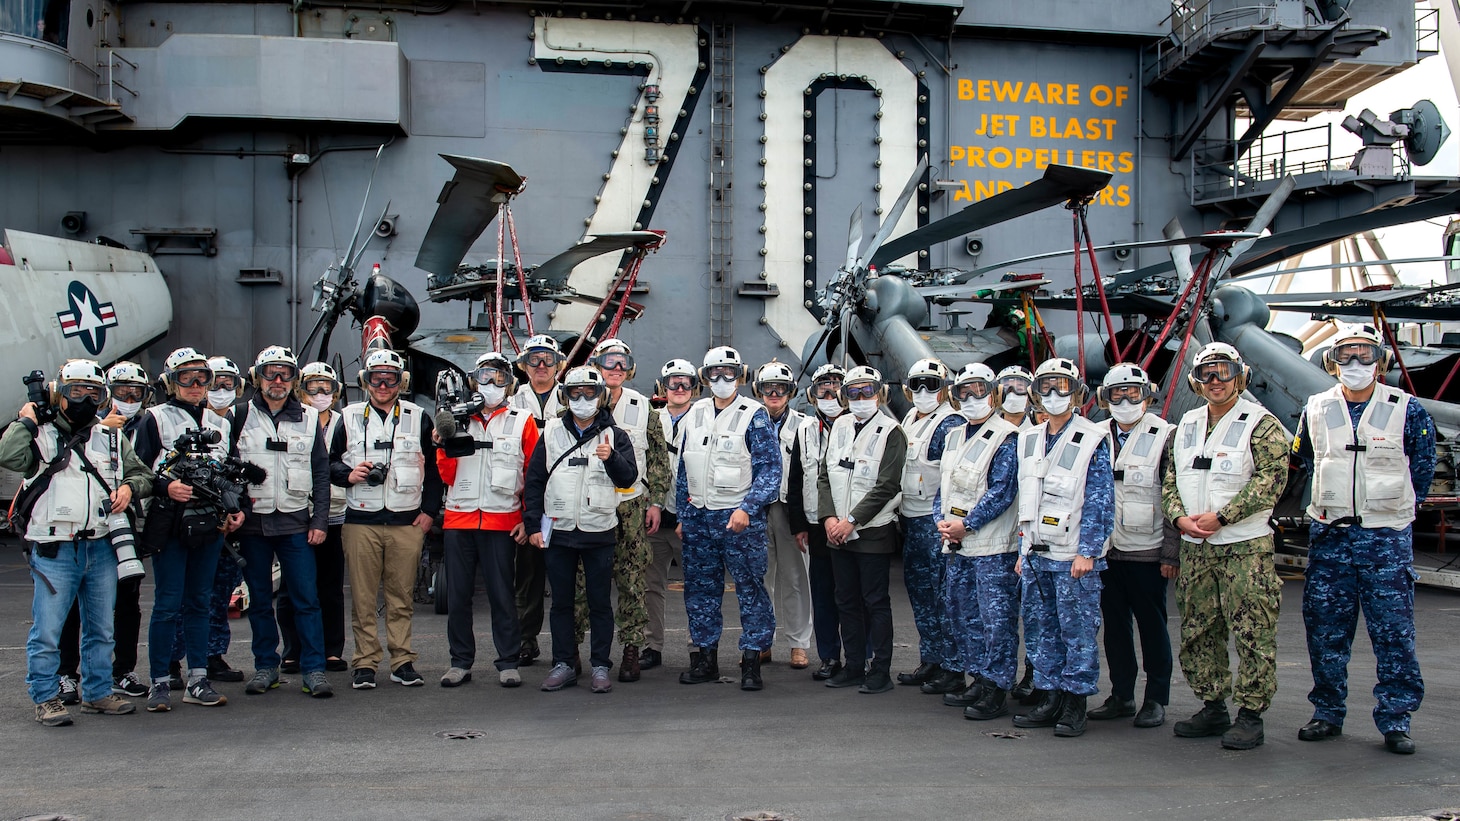 211130-N-LU761-1714 PHILIPPINE SEA (Nov. 30, 2021) Members of the media, personnel from Commander, U.S. 7th Fleet, and Japan Self-Defense Forces and visitors pose for a picture aboard Nimitz-class aircraft carrier USS Carl Vinson (CVN 70) during Annual Exercise (ANNUALEX) 2021, Nov. 30, 2021. ANNUALEX is a multilateral exercise conducted by naval elements of the Royal Australian, Royal Canadian, German, Japan Maritime Self-Defense Force and U.S. navies to demonstrate naval interoperability and a joint commitment to a free, open and inclusive Indo-Pacific. (U.S. Navy photo by Mass Communication Specialist 3rd Class Caden Richmond)